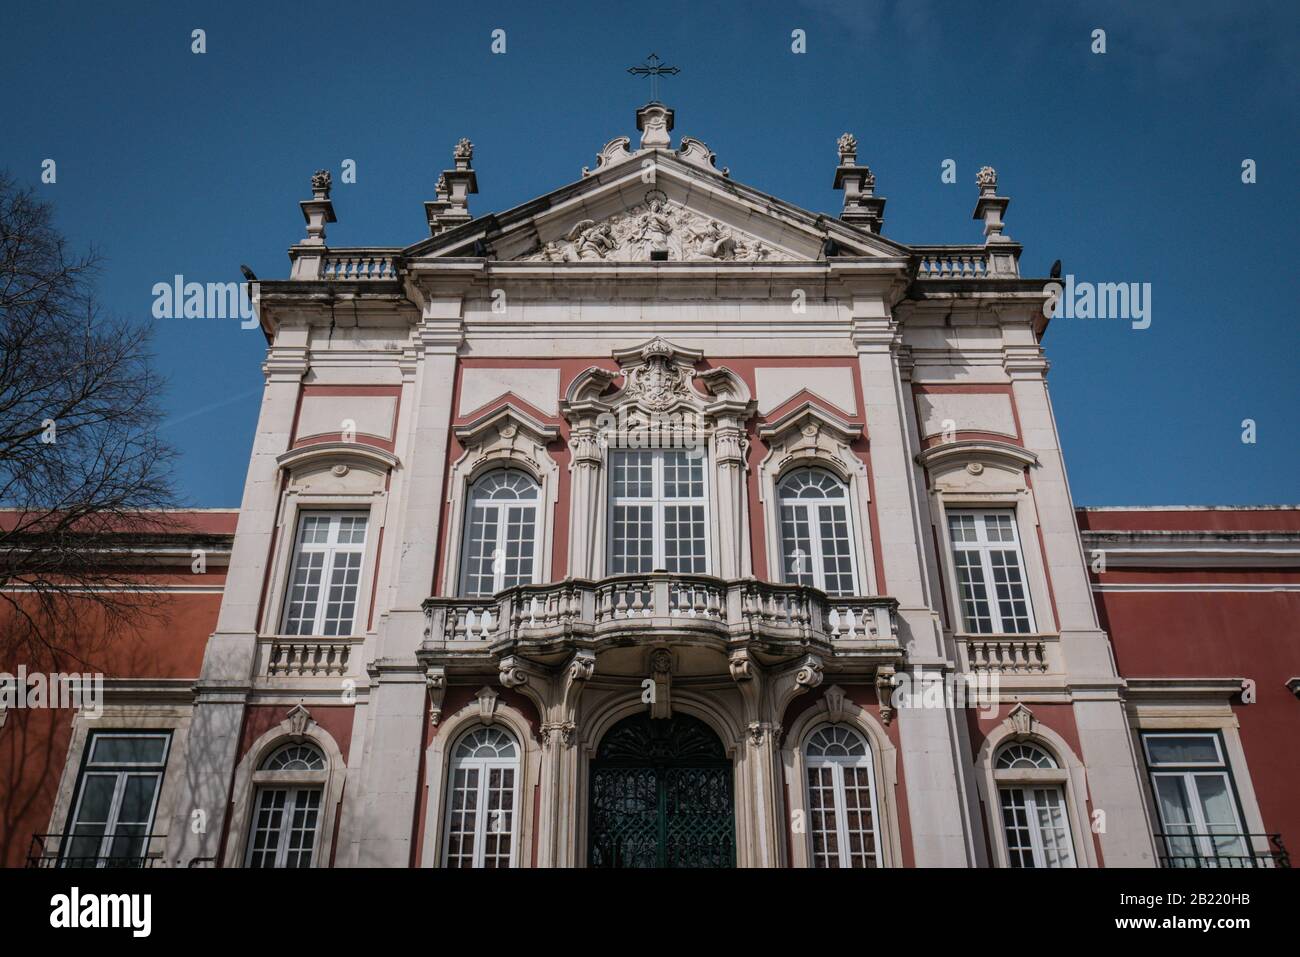 The Bemposta Palace, also known as the Paço da Rainha, is a neoclassical palace in the area of Bemposta, now the civil parish of Pena, in Lisbon. It w Stock Photo